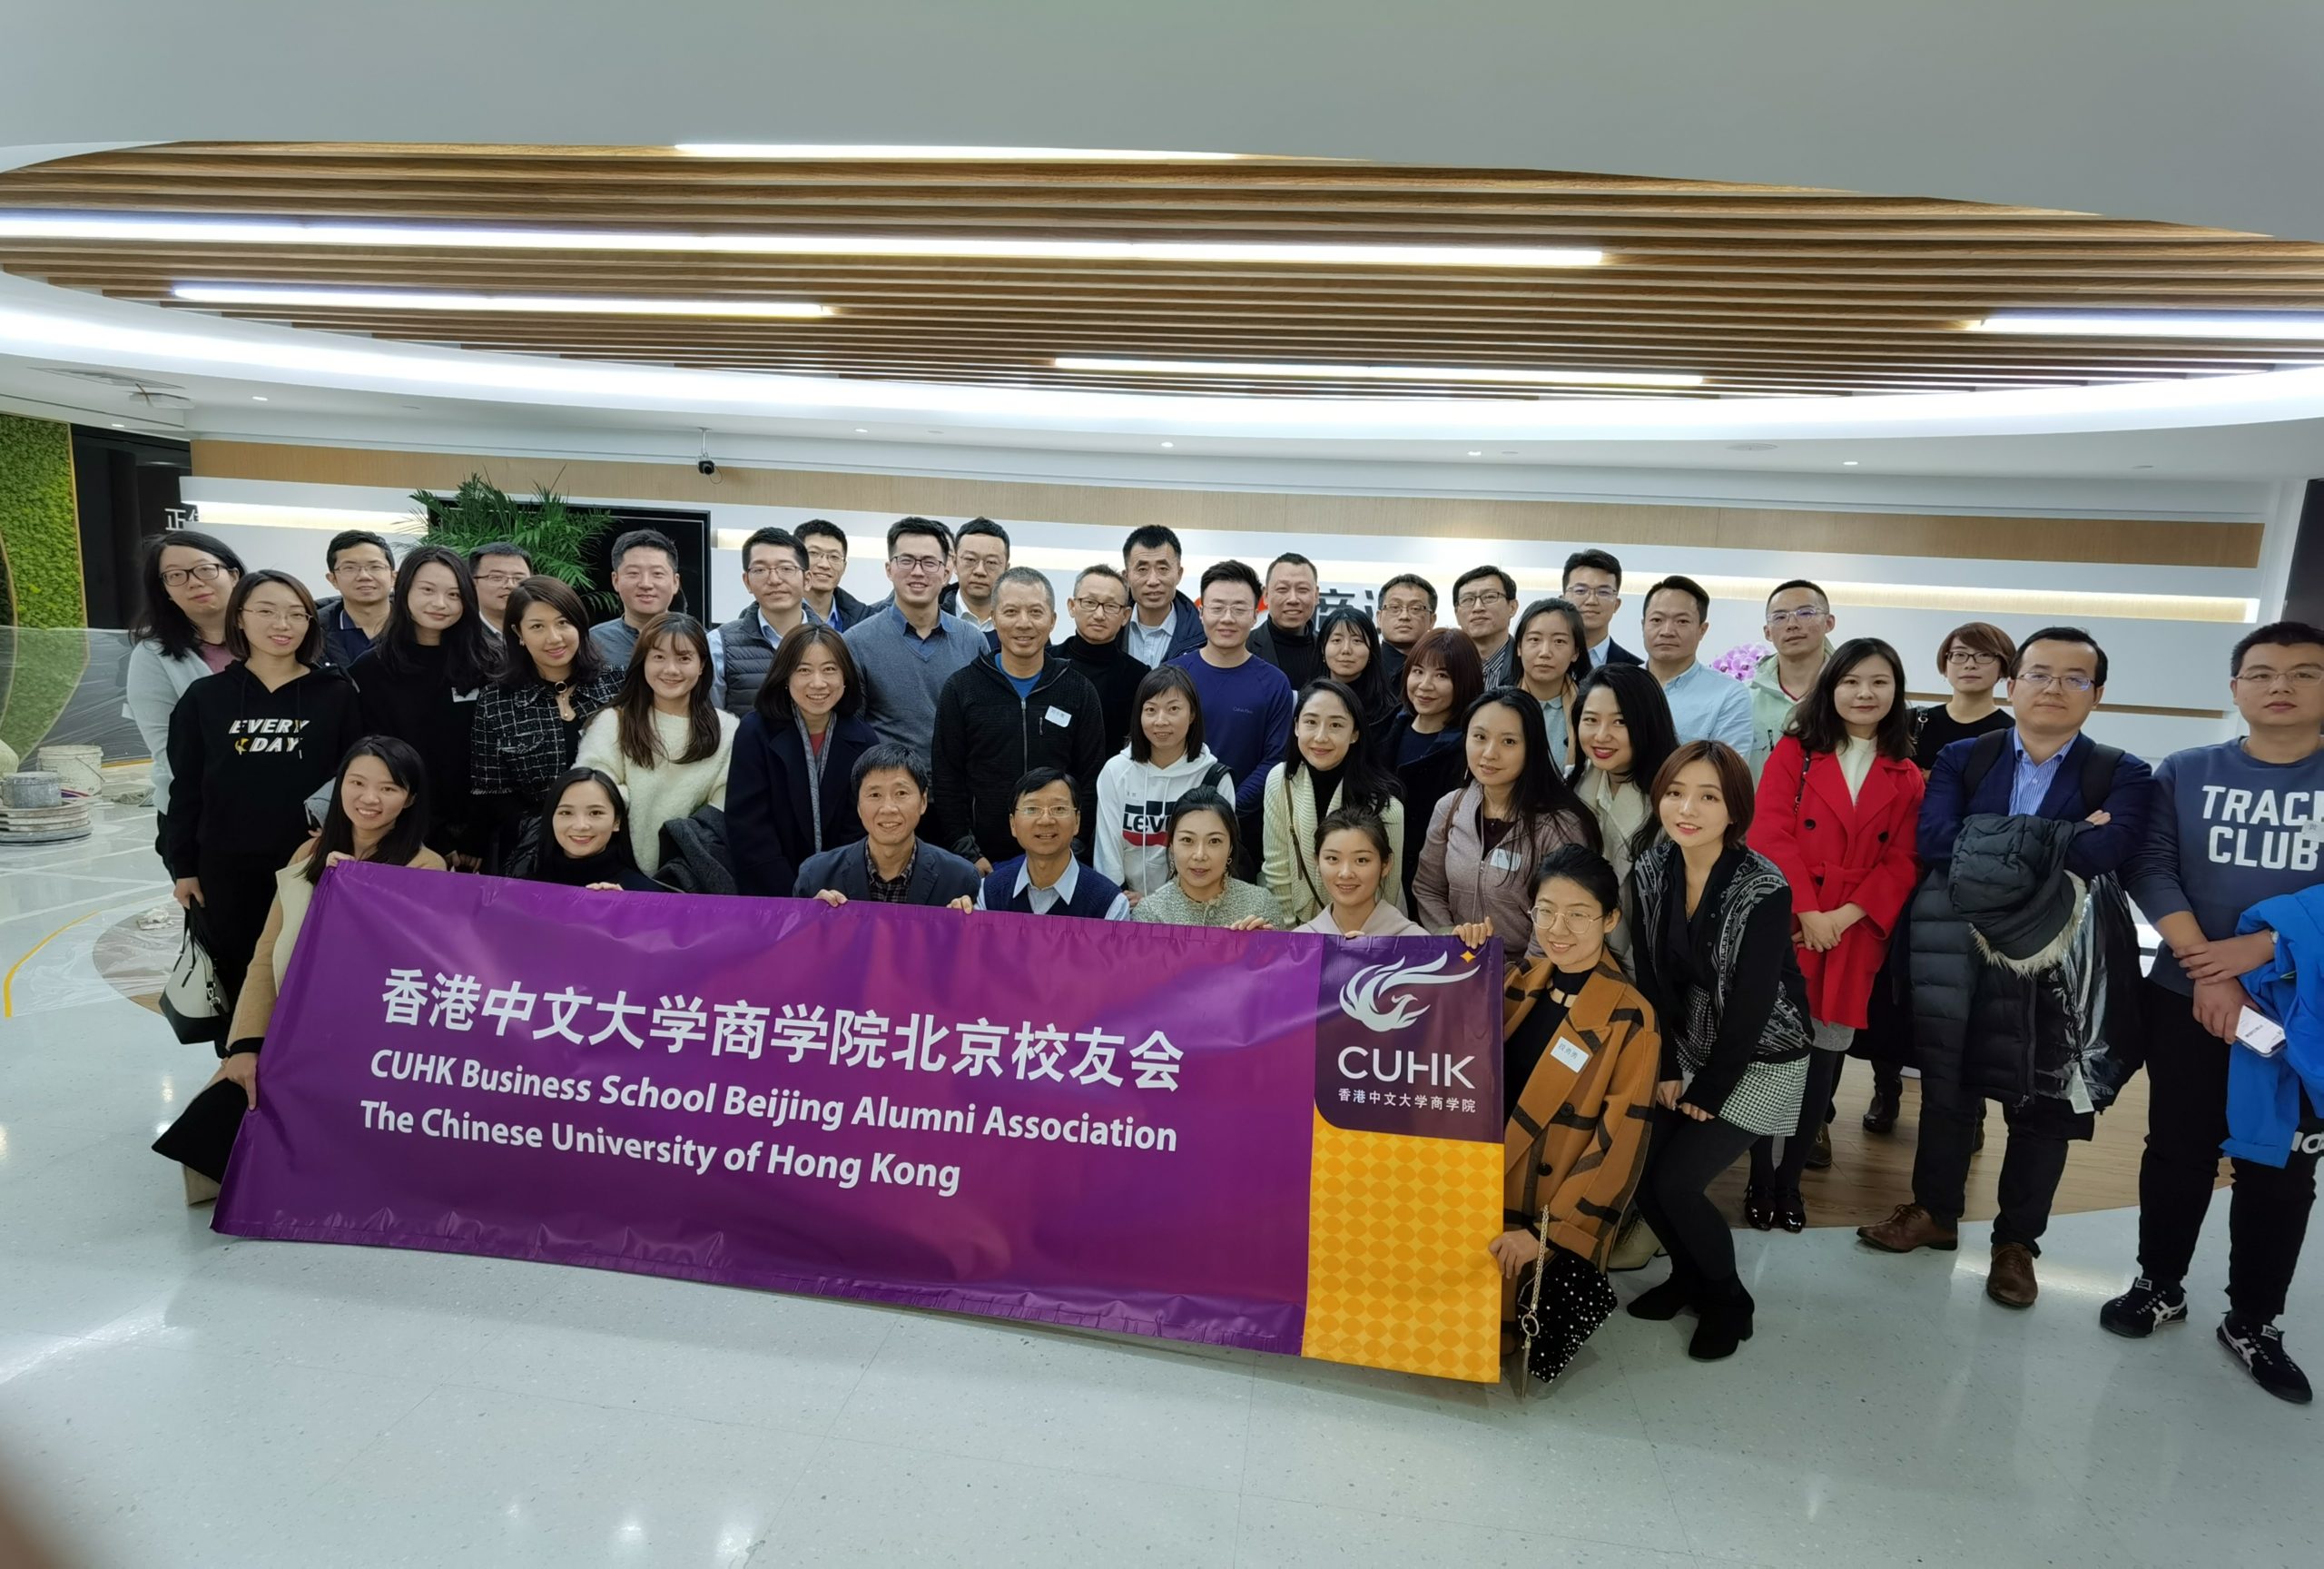 In 2019, members of the Beijing AA paid a visit to SenseTime Group Limited (SenseTime), which is founded by Professor Tang Xiaoou from the Department of Information Engineering.